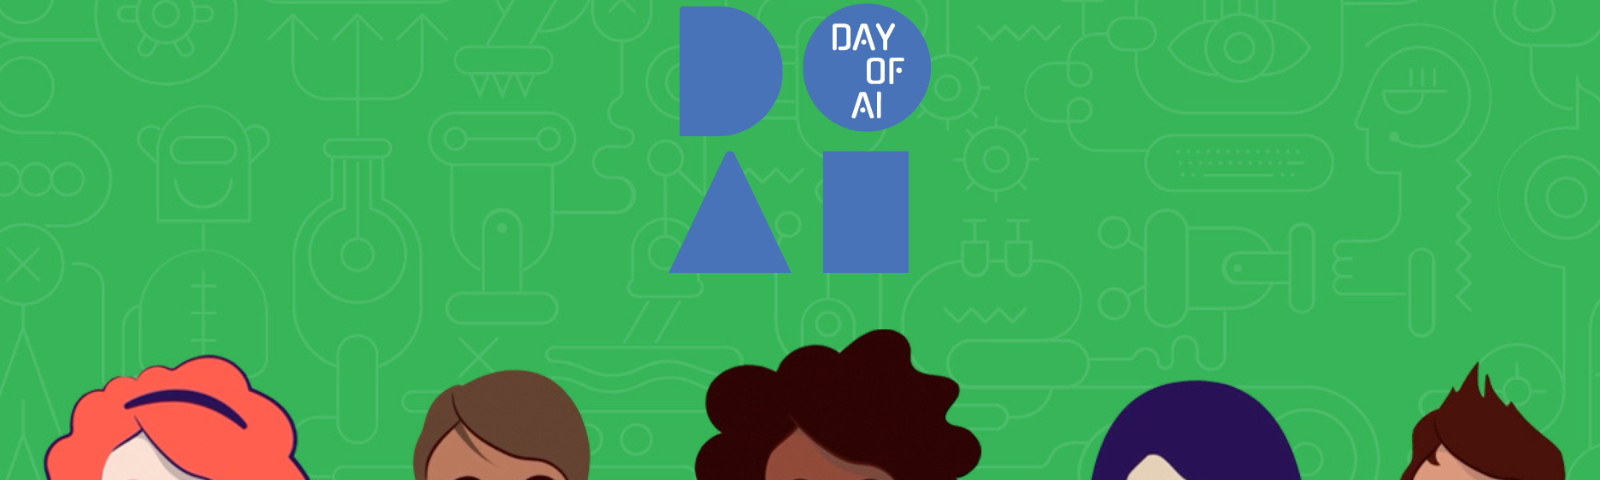 Graphic with Day of AI logo at the top and illustration of 5 children of different genders and ethnicities.